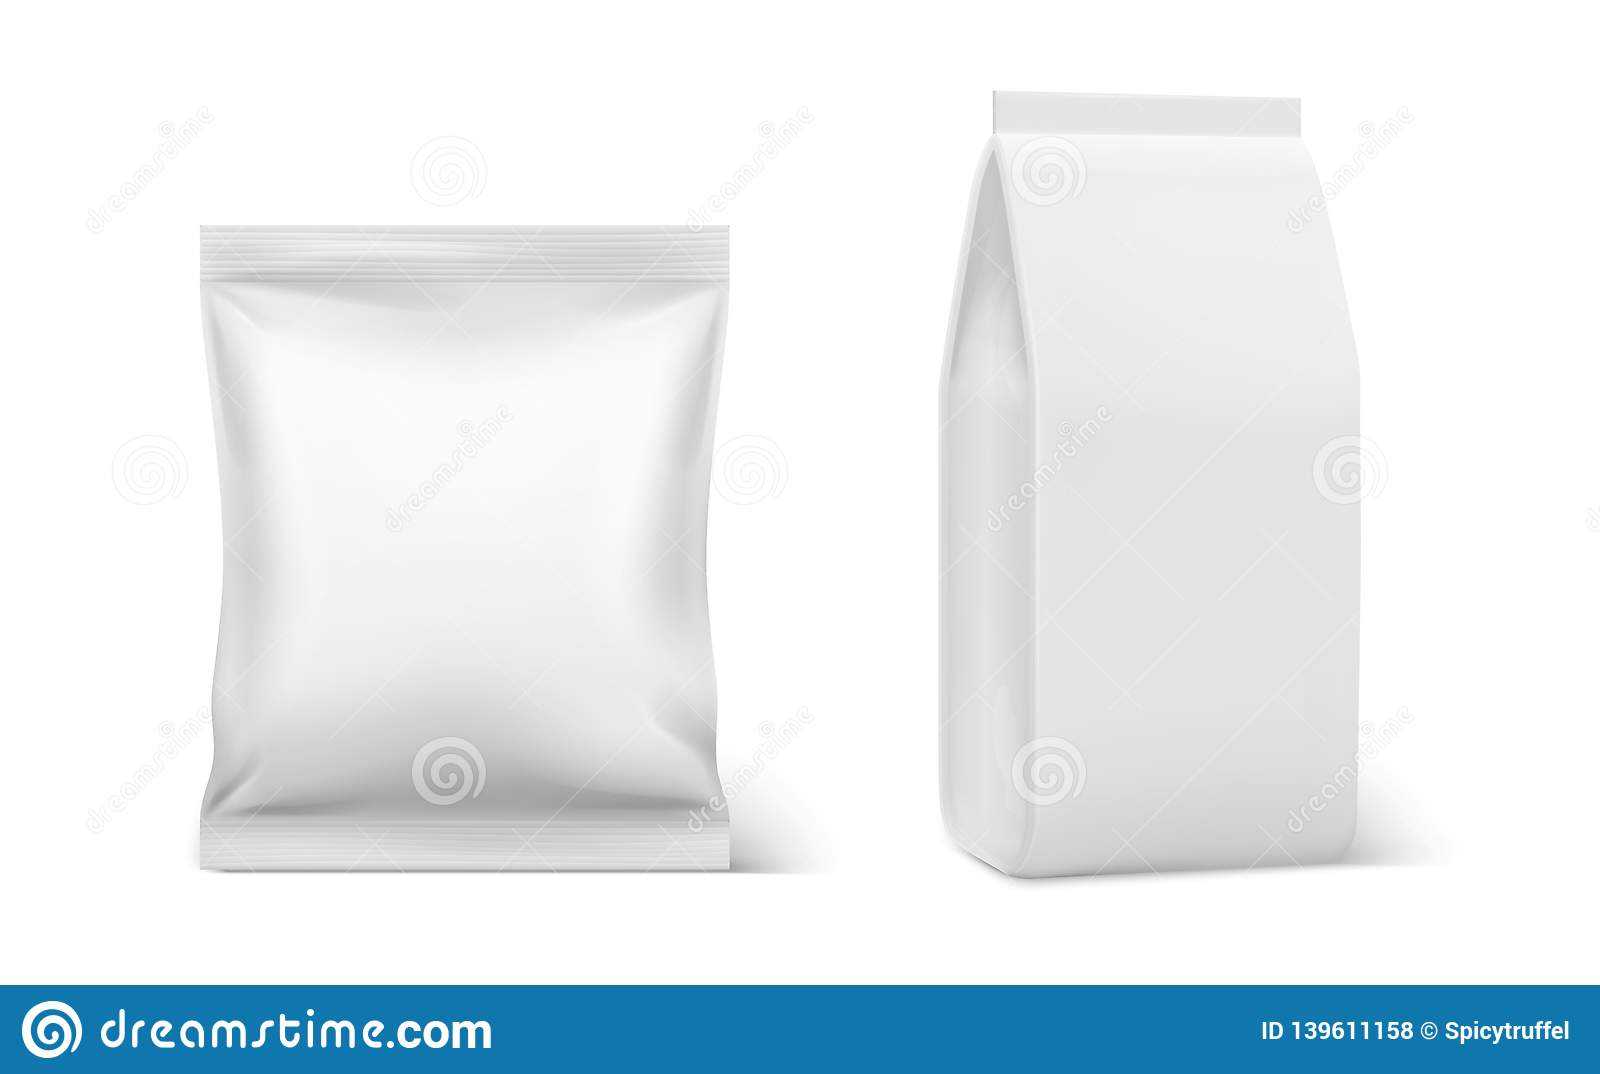 Realistic Pillow Pack. Coffee Doy Blank Mockup, Plastic For Blank Packaging Templates